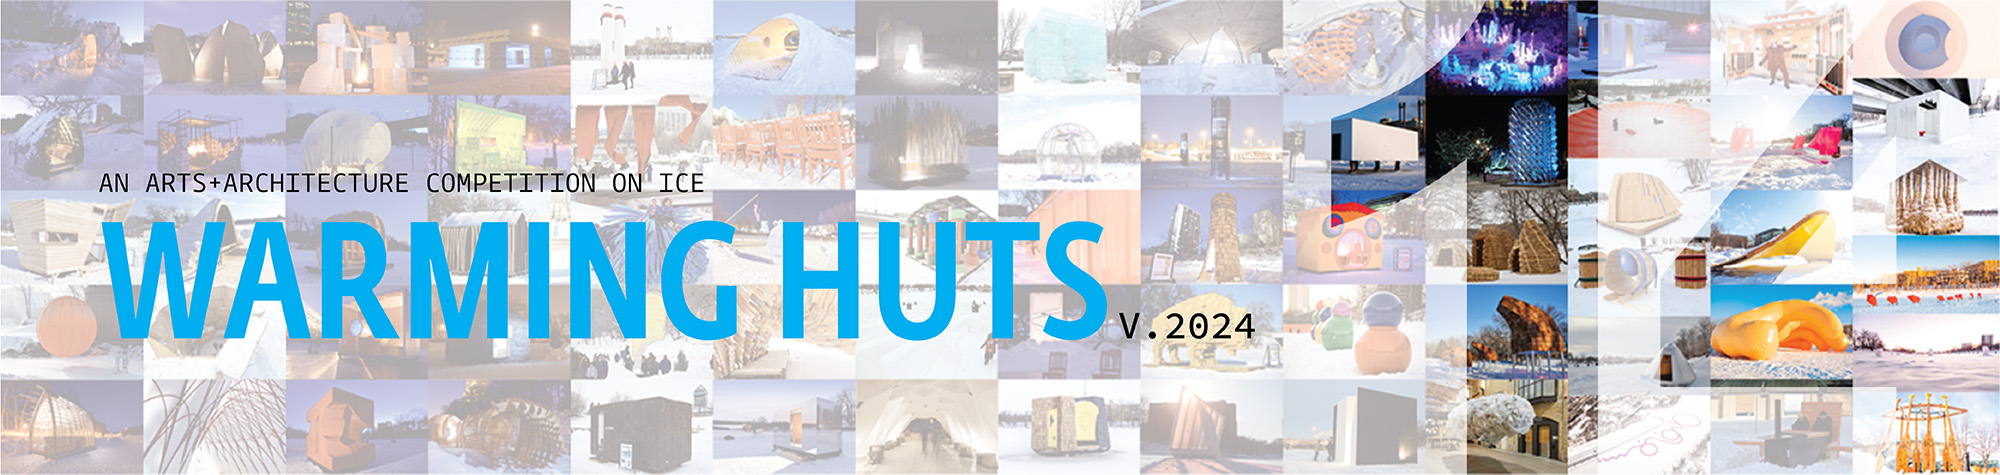 an arts + architecture competition on ice - WARMING HUTS v.2024